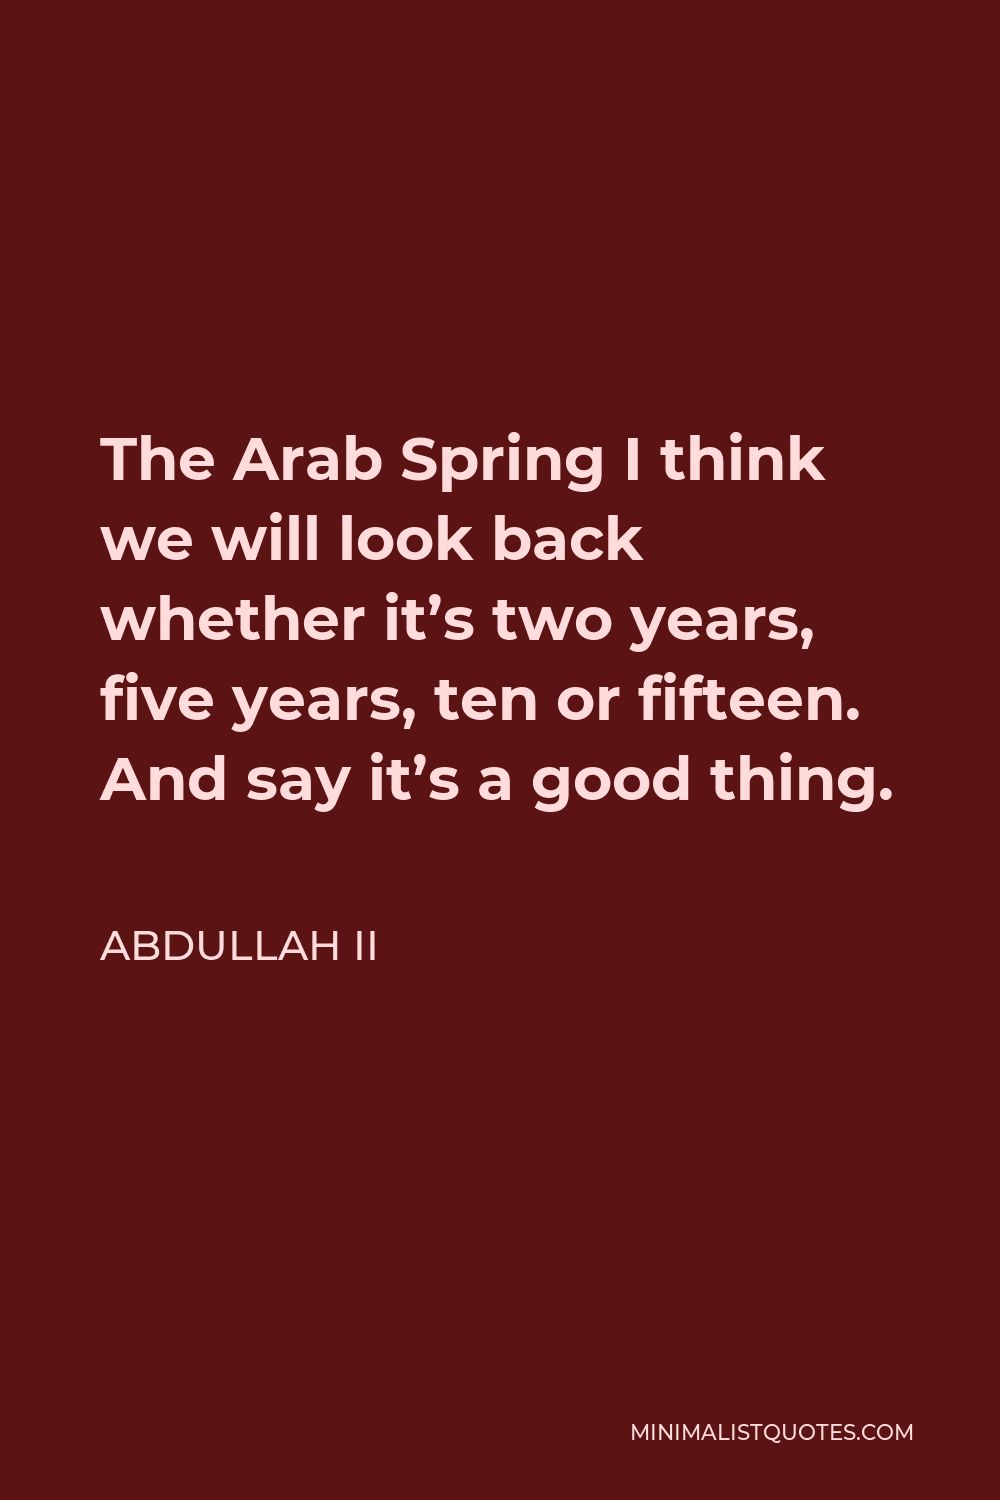 Abdullah II Quote - The Arab Spring I think we will look back whether it’s two years, five years, ten or fifteen. And say it’s a good thing.